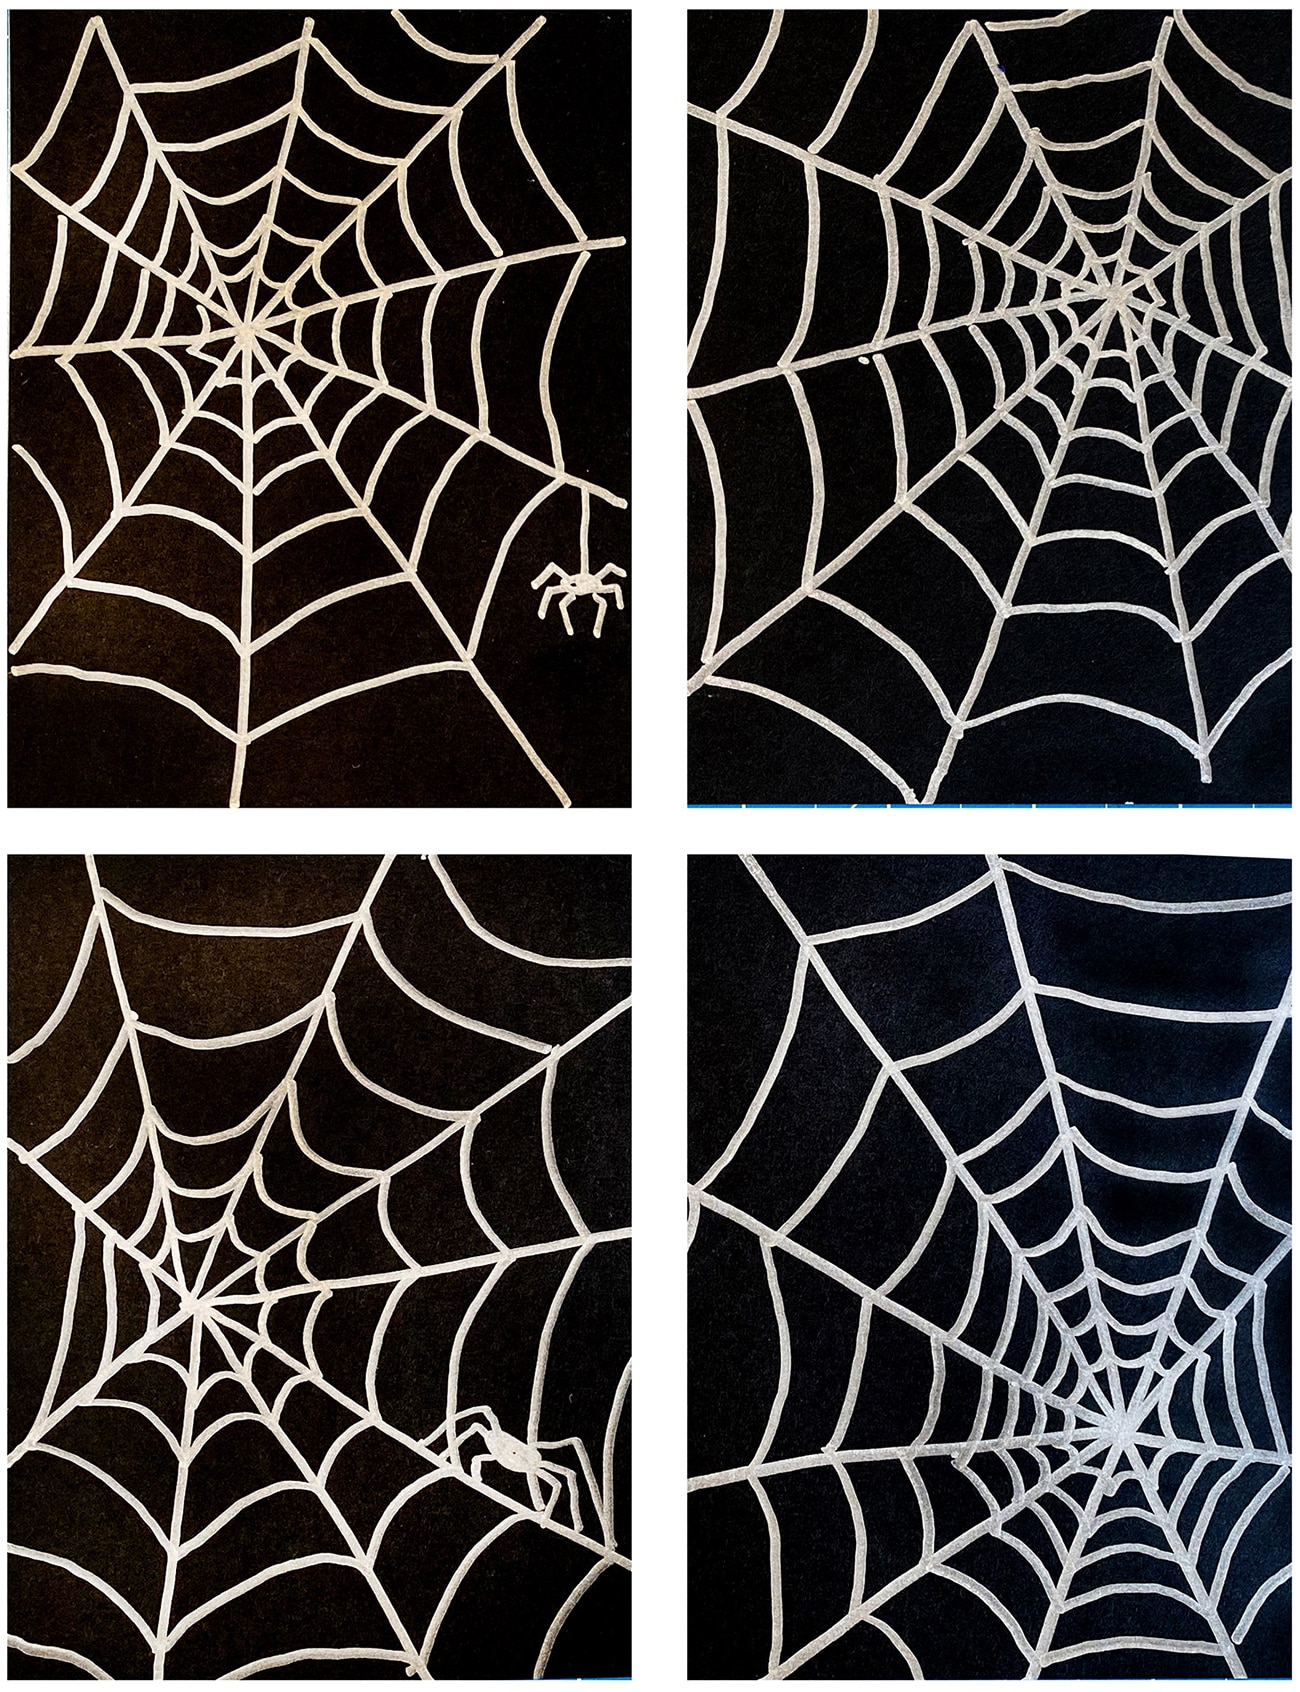 How to Draw a Spider Web- A Drawing Tutorial - The Kitchen Table Classroom